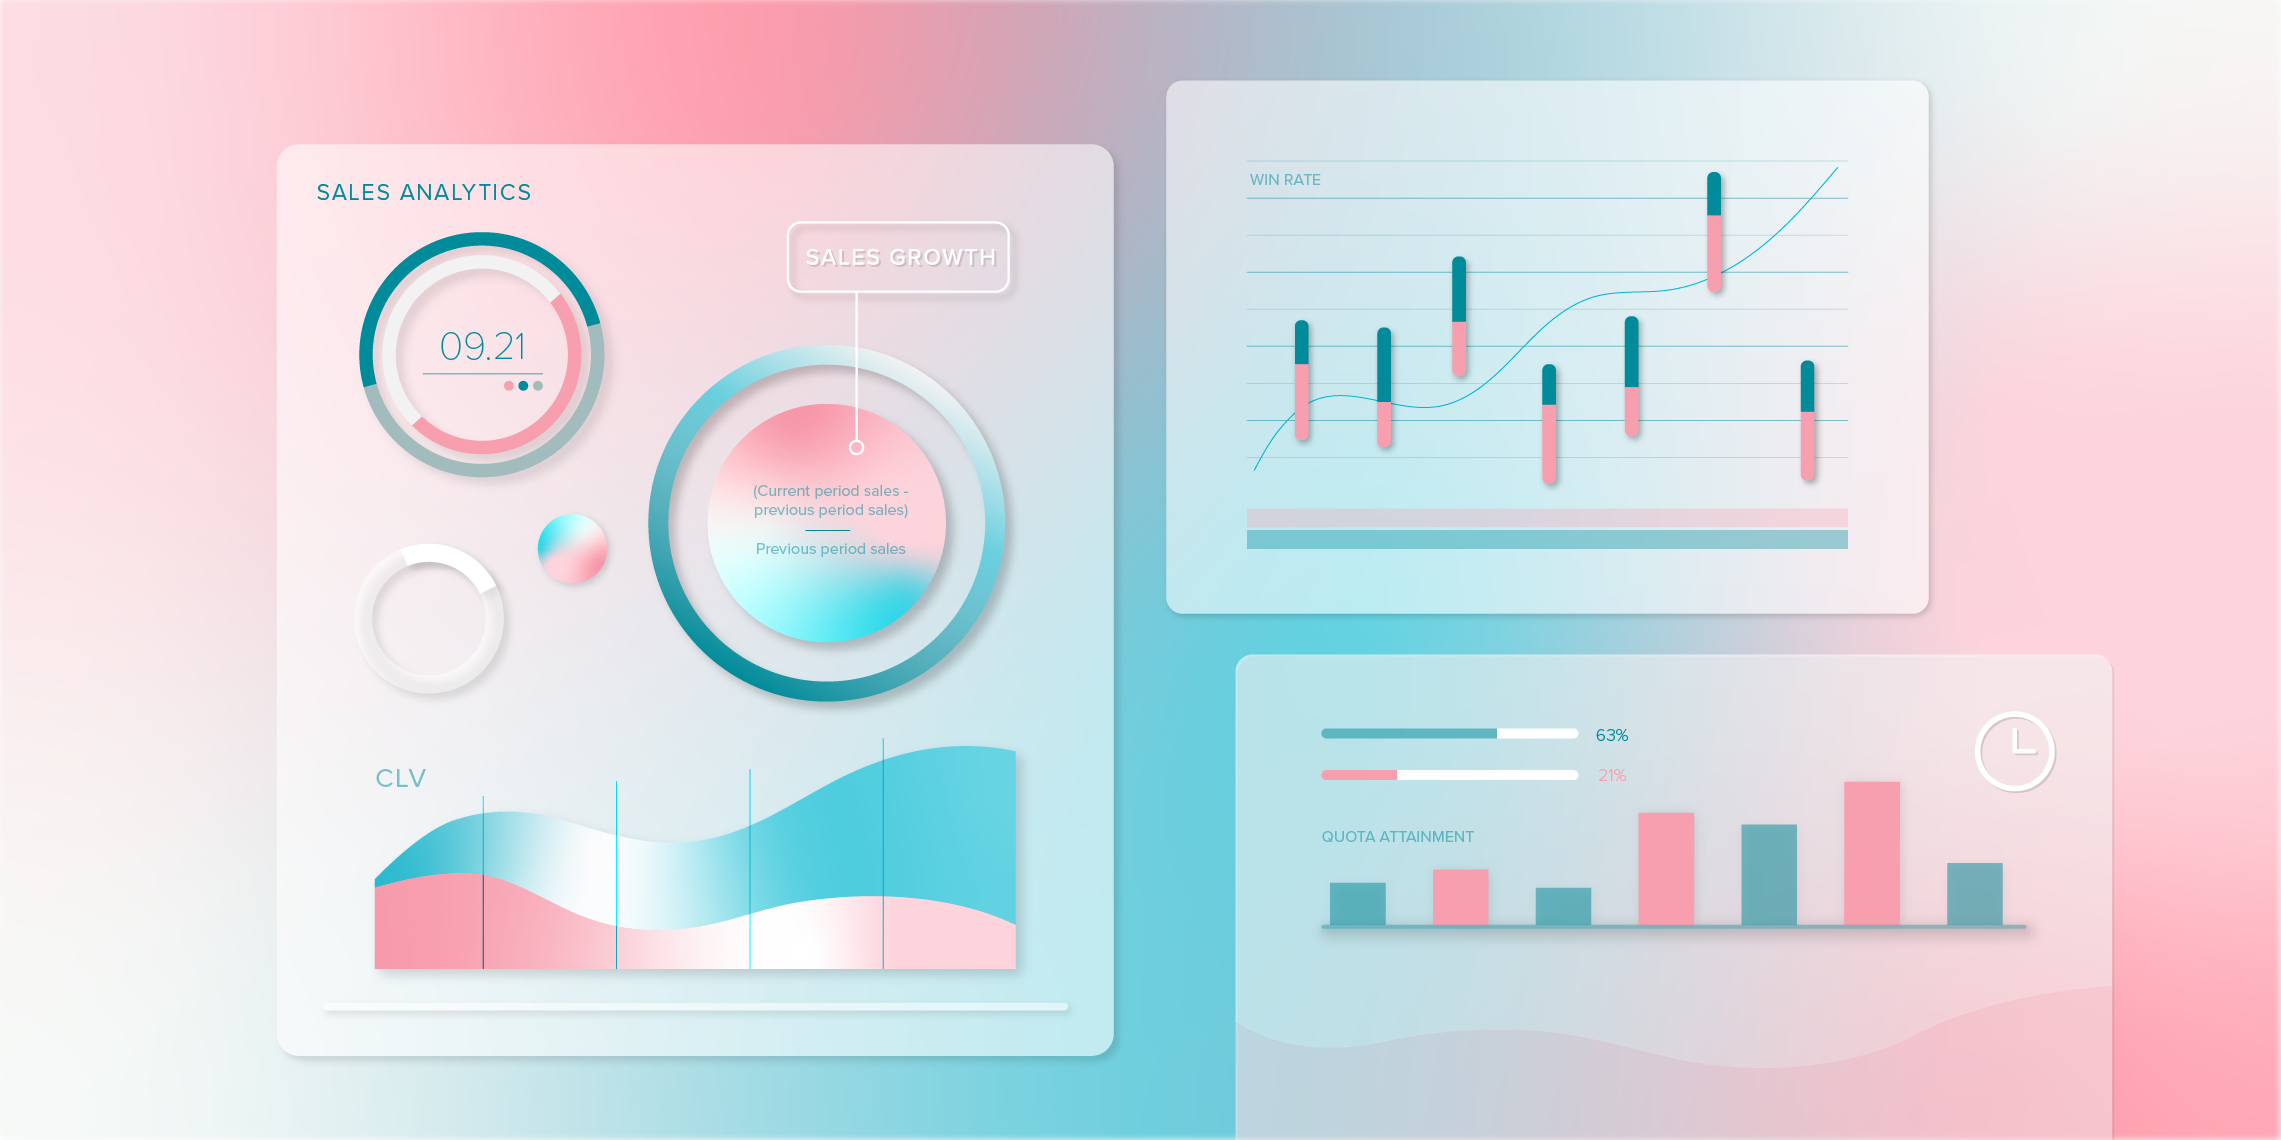 Why You Need Sales Analytics